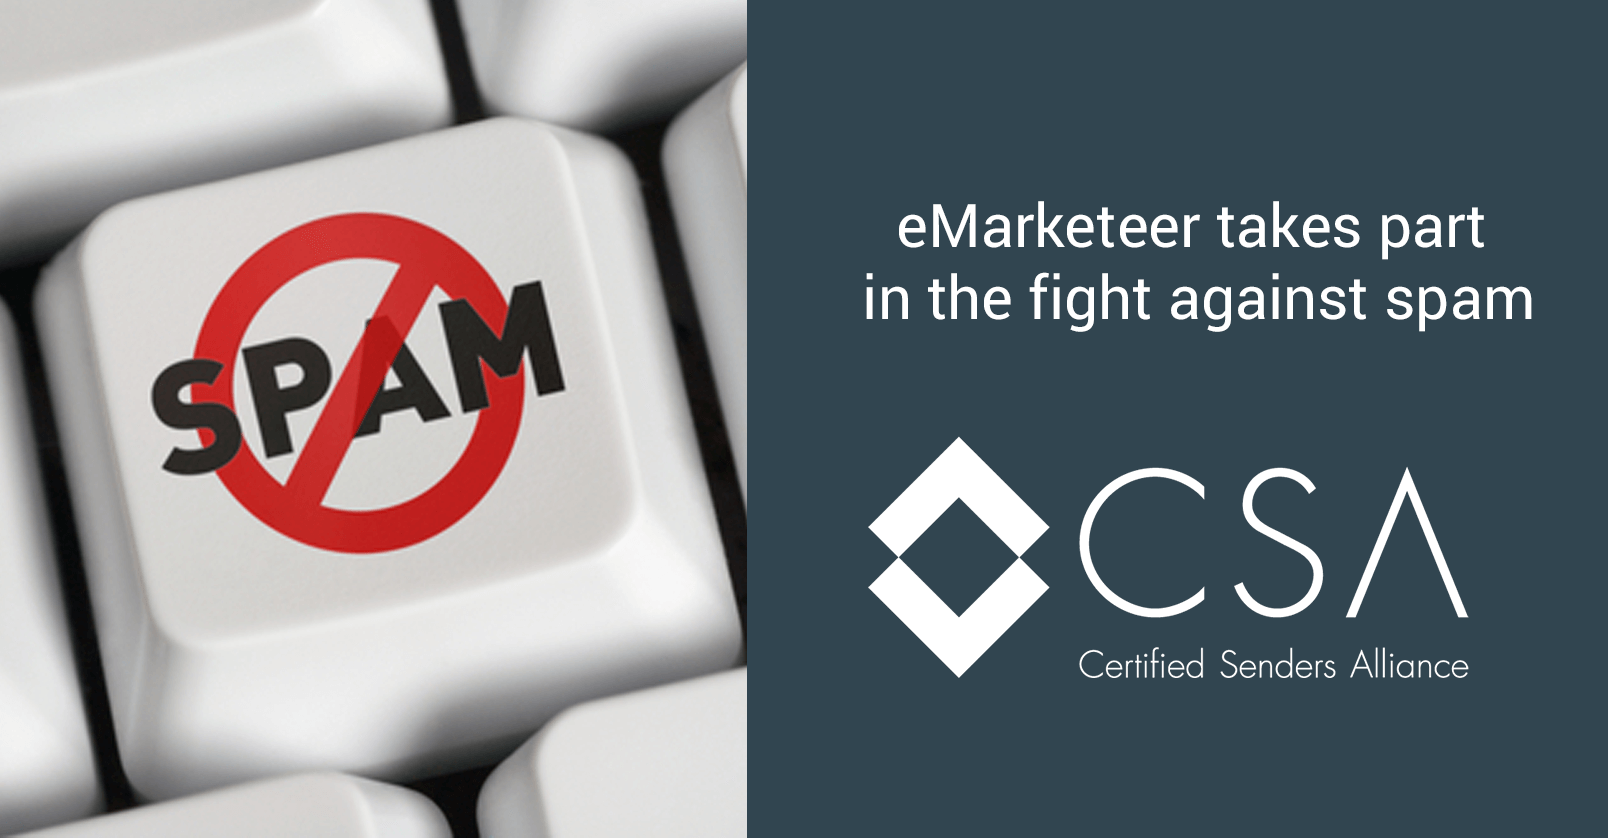 eMarketeer takes part in the fight against spam